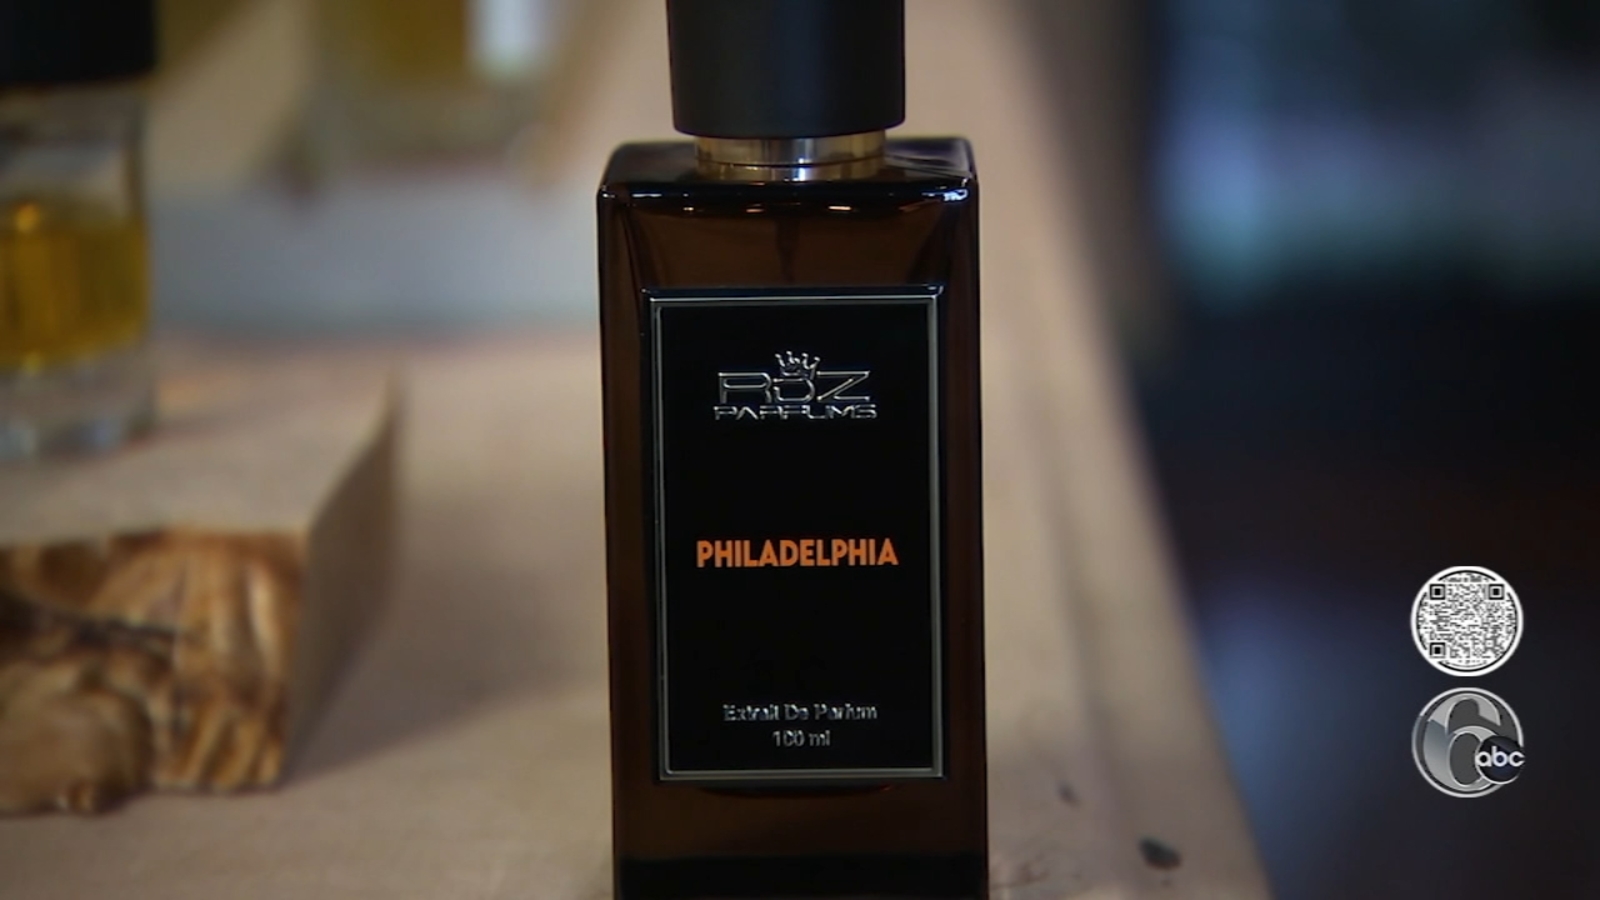 Perfumology features more than 1,000 perfumes, including the scent of Philadelphia [Video]